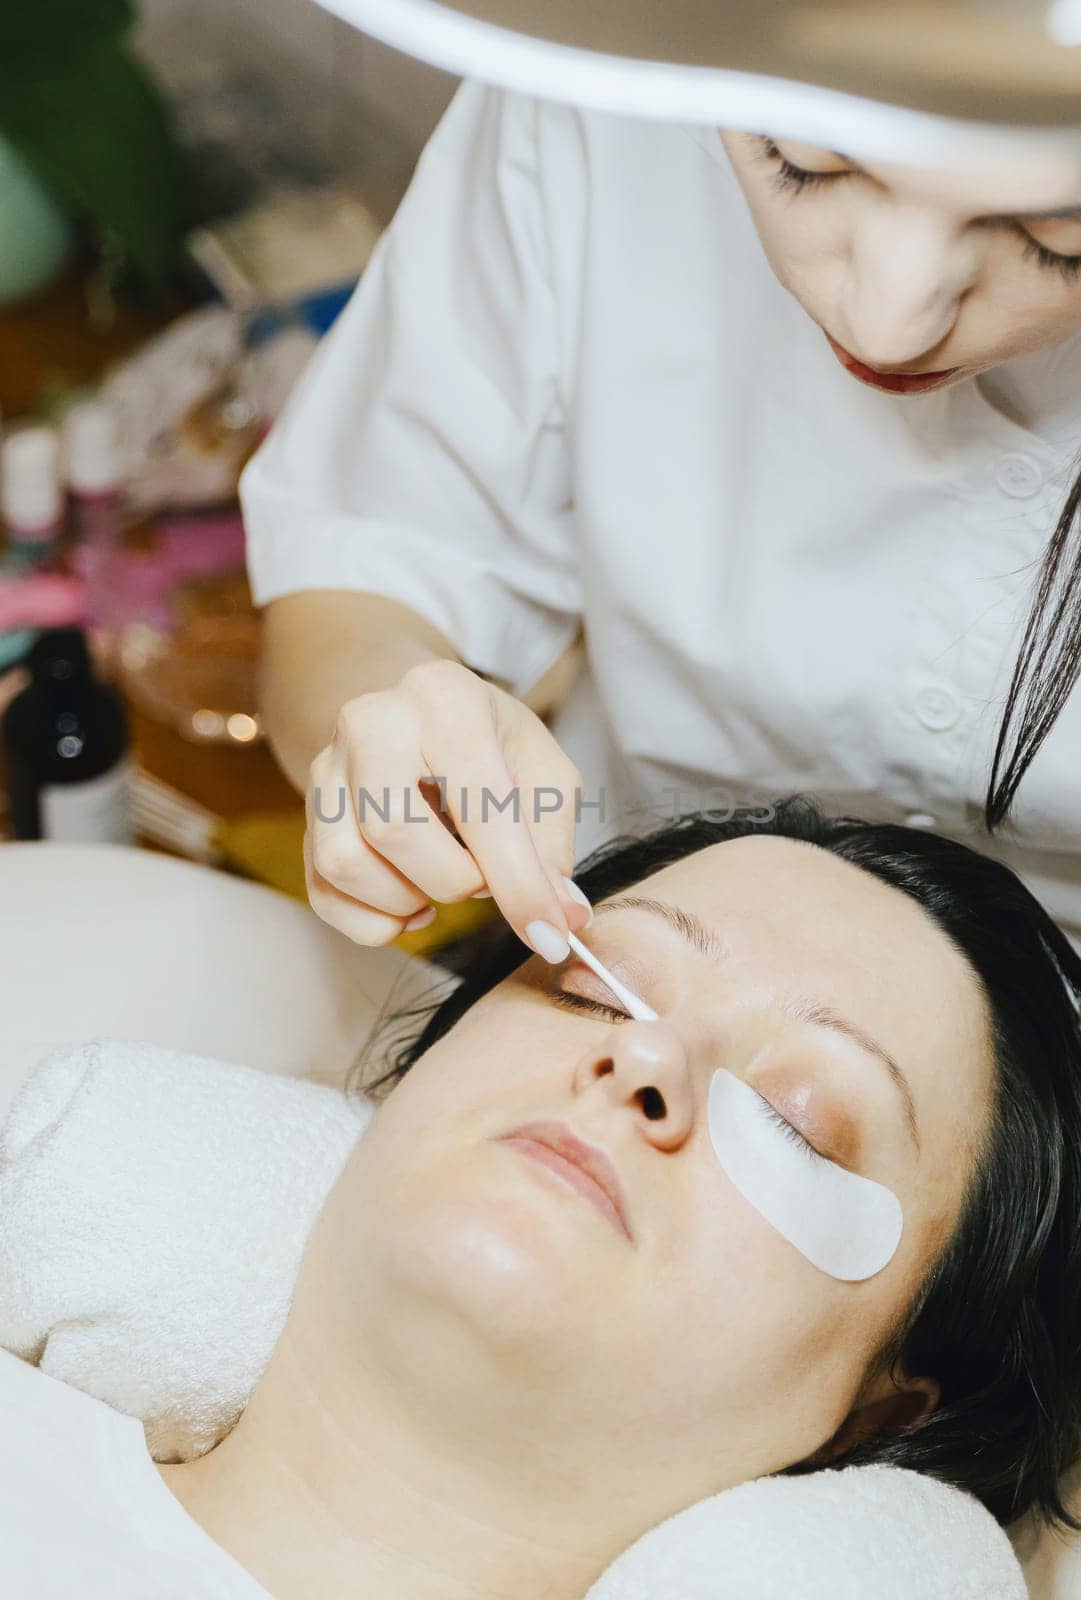 Portrait of a young beautiful Caucasian brunette cosmetologist girl in a white coat who degreases eyelashes on the lower eyelid with a cotton swab to a woman lying on a cosmetology table in a home beauty salon, close-up side view.